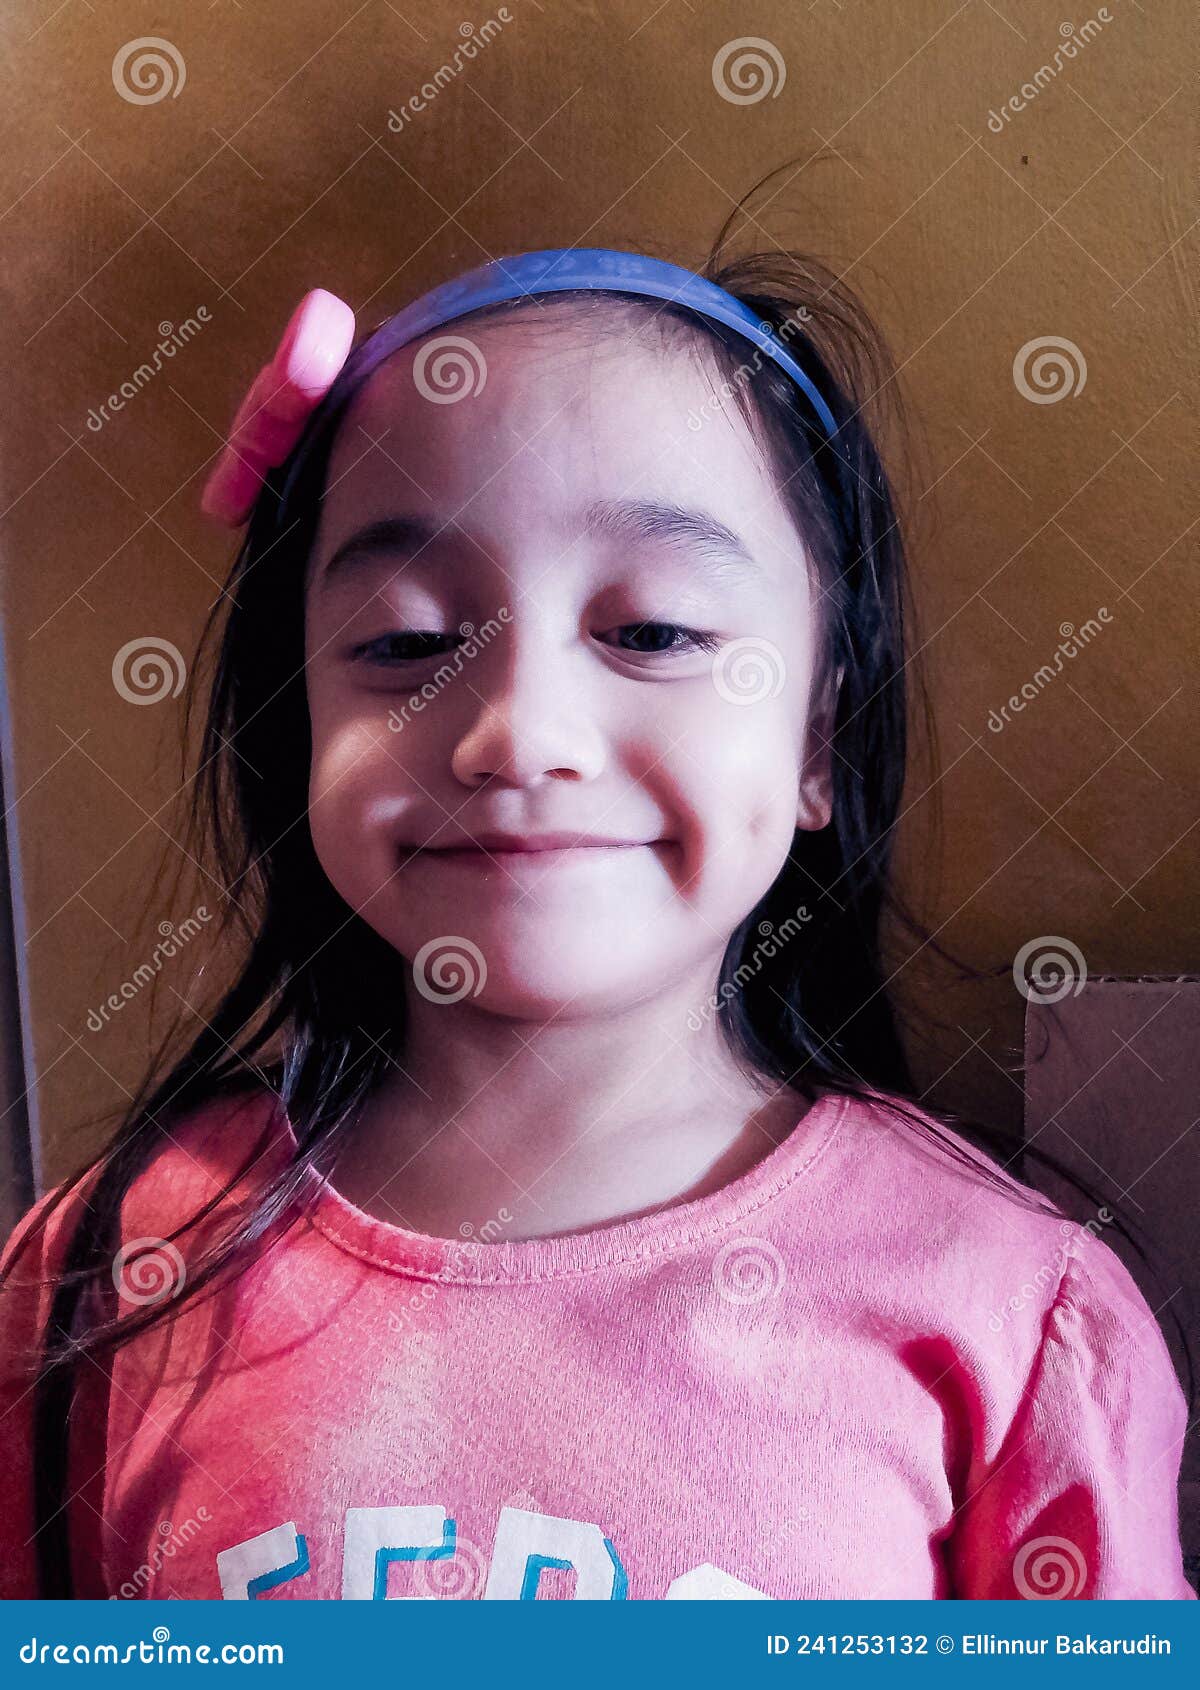 Asian Little Girl with Dimple on Face is Smiling Stock Photo - Image of ...